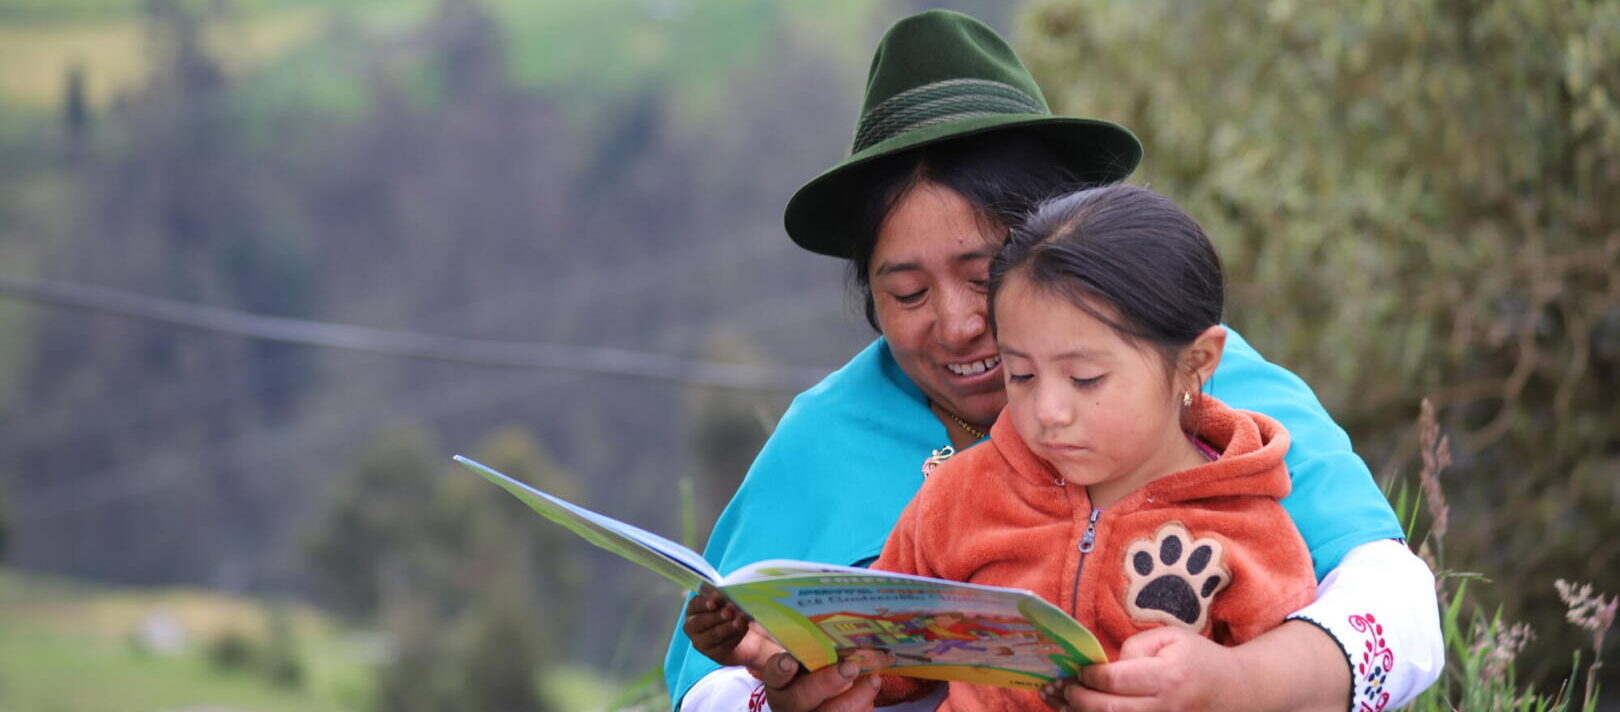 María wraps her arms around her daughter, Dayana, while she reads to her.